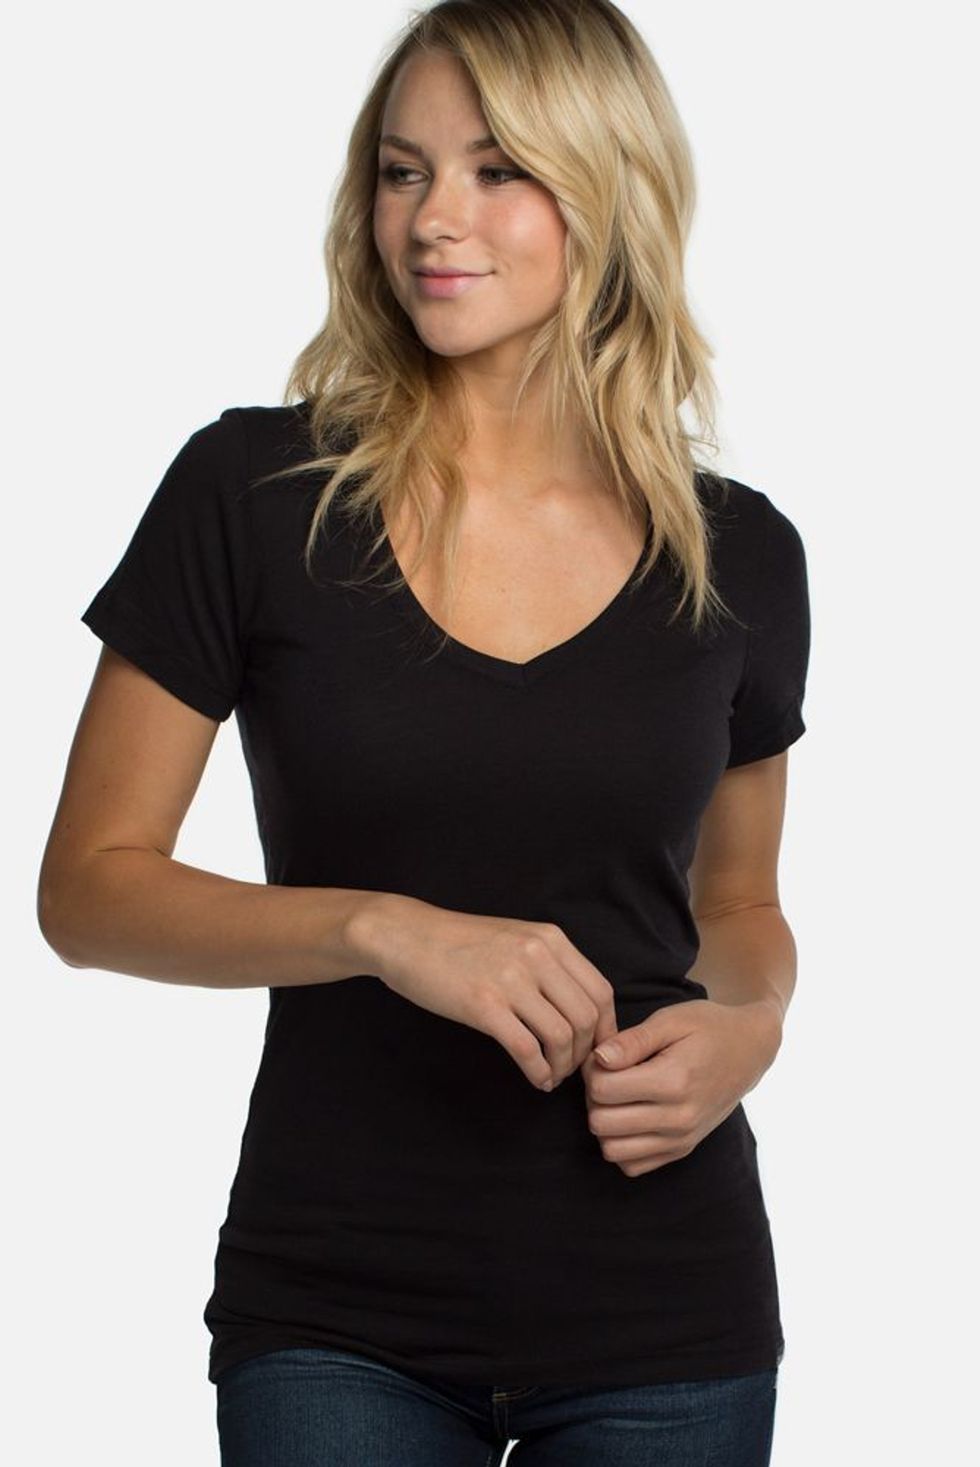 19 Best V-Neck T-Shirts for Women in 2023